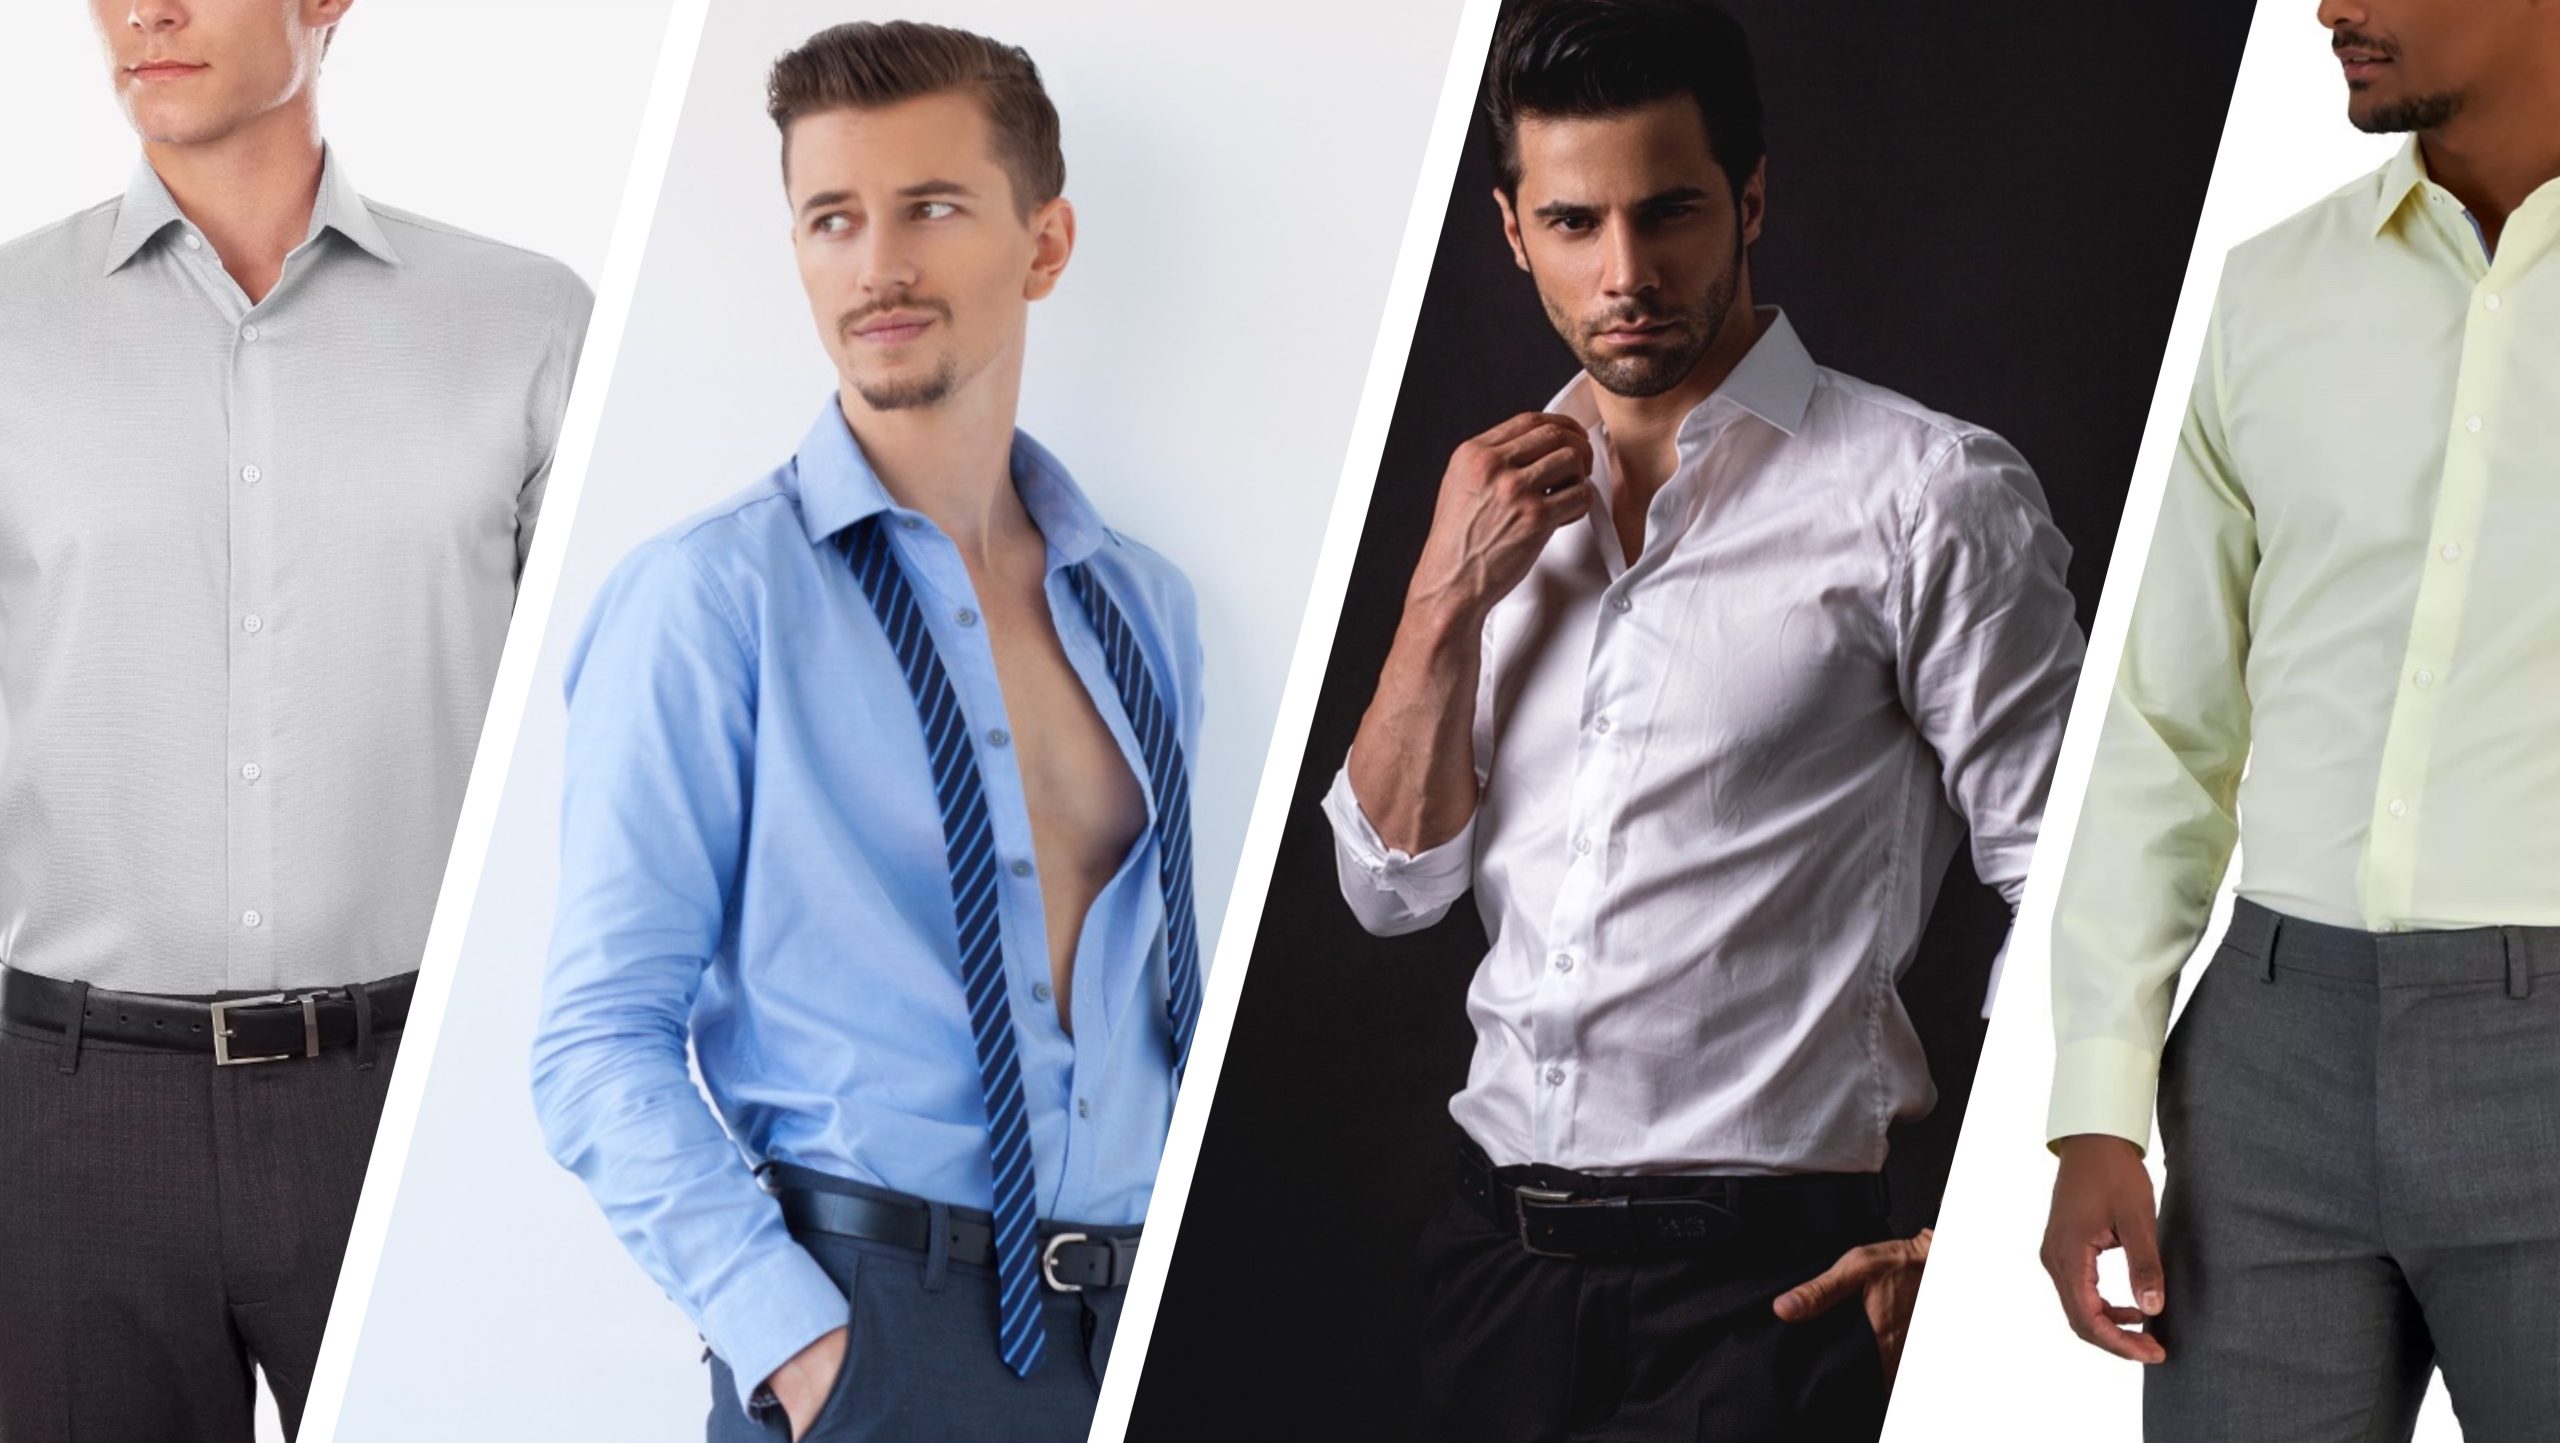 How to Wear Dress Shirts More Casually